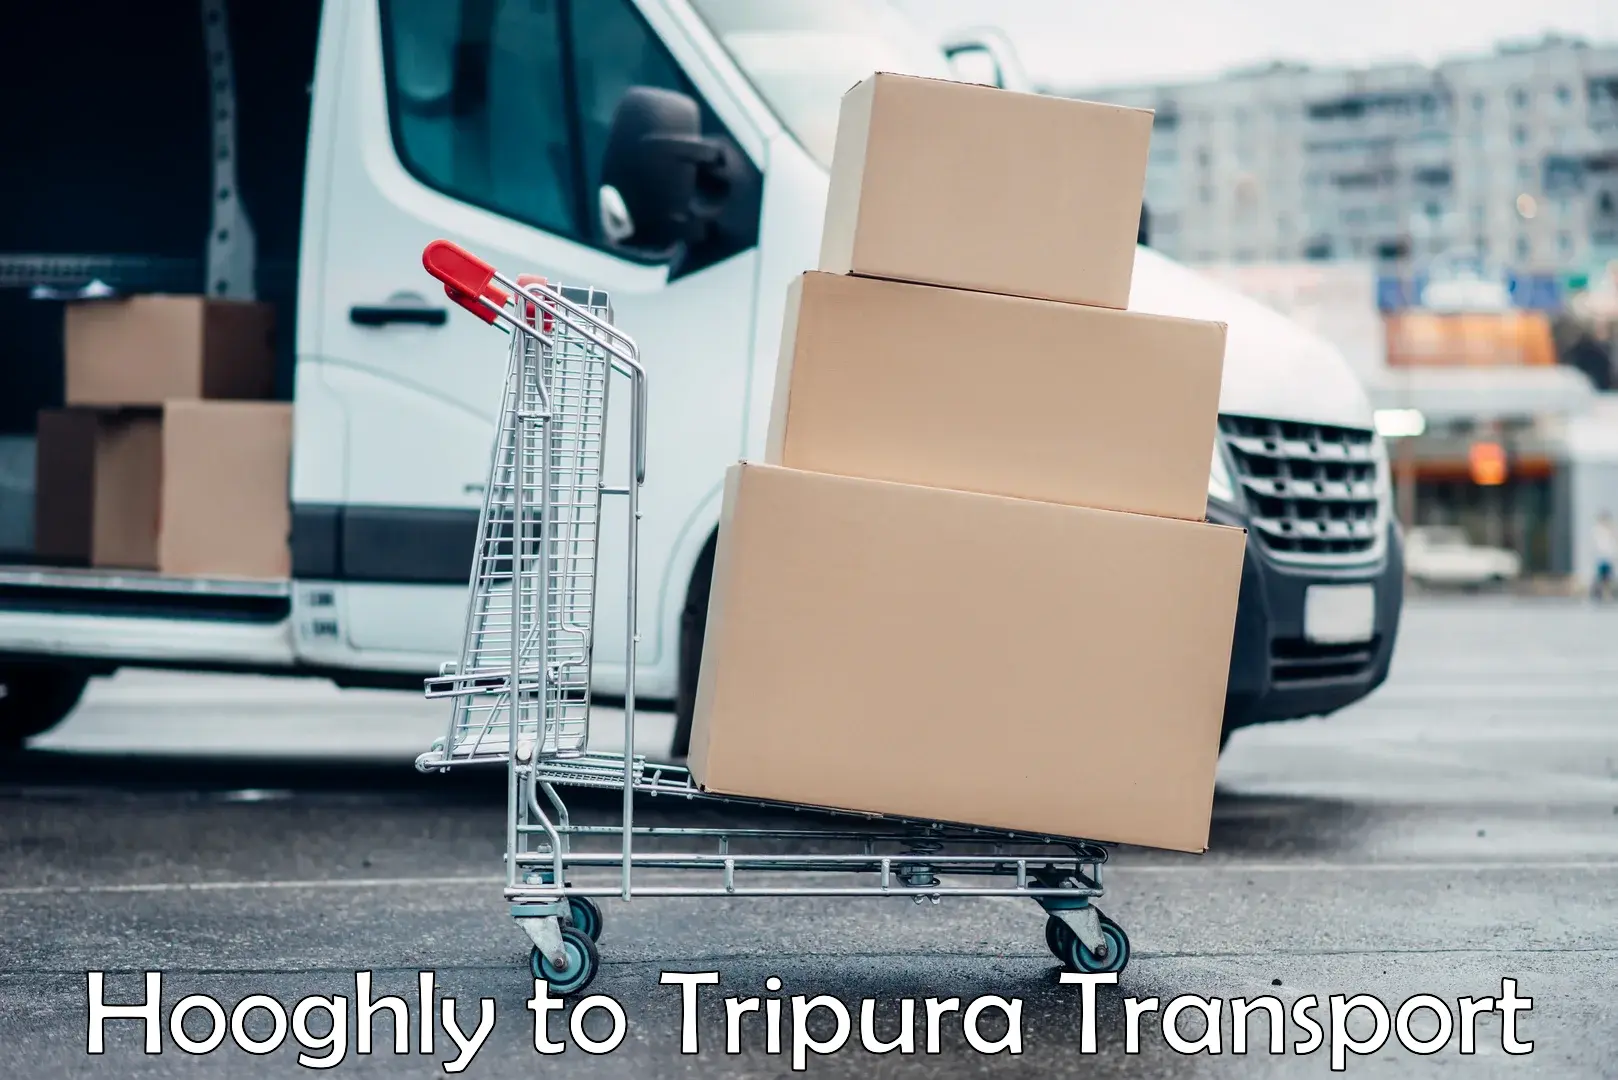 Domestic goods transportation services Hooghly to Tripura